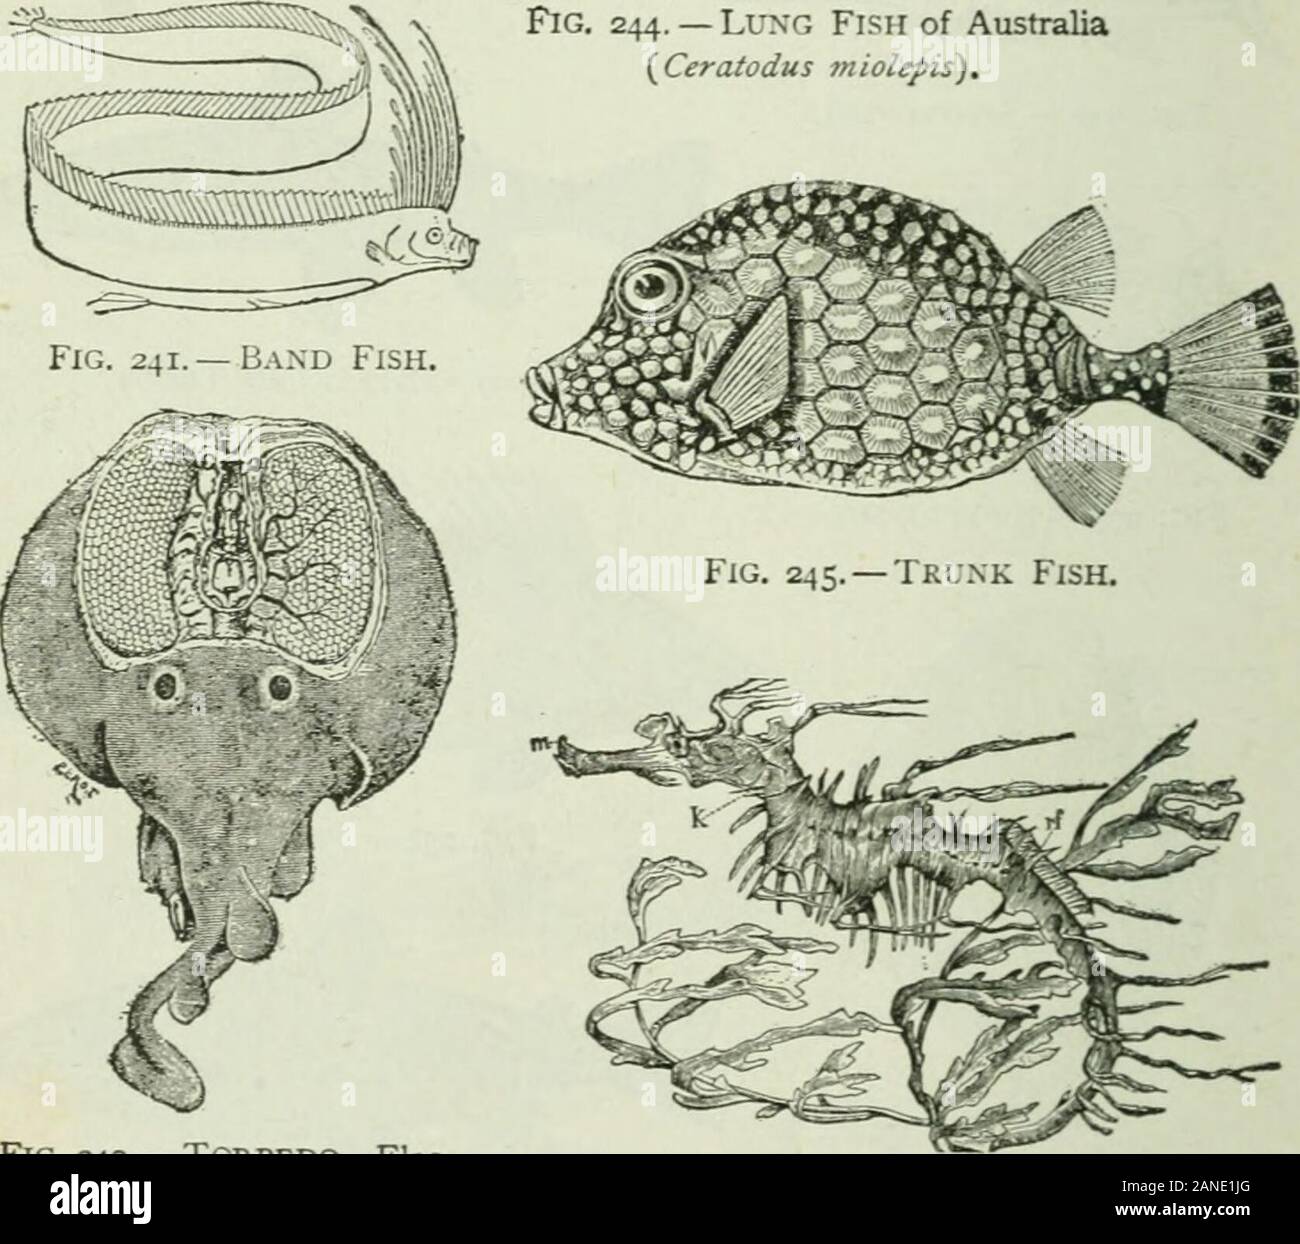 Beginners' zoology . Fig. 244. — Lung Fish of Australia{Ceratodus mioleptis).. Fig. 242. — TCRPEDO. Elec-trical organs at right andleft of brain. Fig. 246. —Seaweed Fish, x^{Phyllopteryx eques). Remarkable Fish. Special Reports. (Encyclopedia, texts, dictionary.) 124 GENERAL CLASSIFICATION 125 RECOGNITION GROUP CHARACTERS The commoner members of the several branches may be recog-nized by the following characters : — 1. The Protozoans are the only one-celled animals. 2. The Sponges are the only animals having pores all over thebody for the inflow of water. 3. The Polyps are the only many-celled Stock Photo